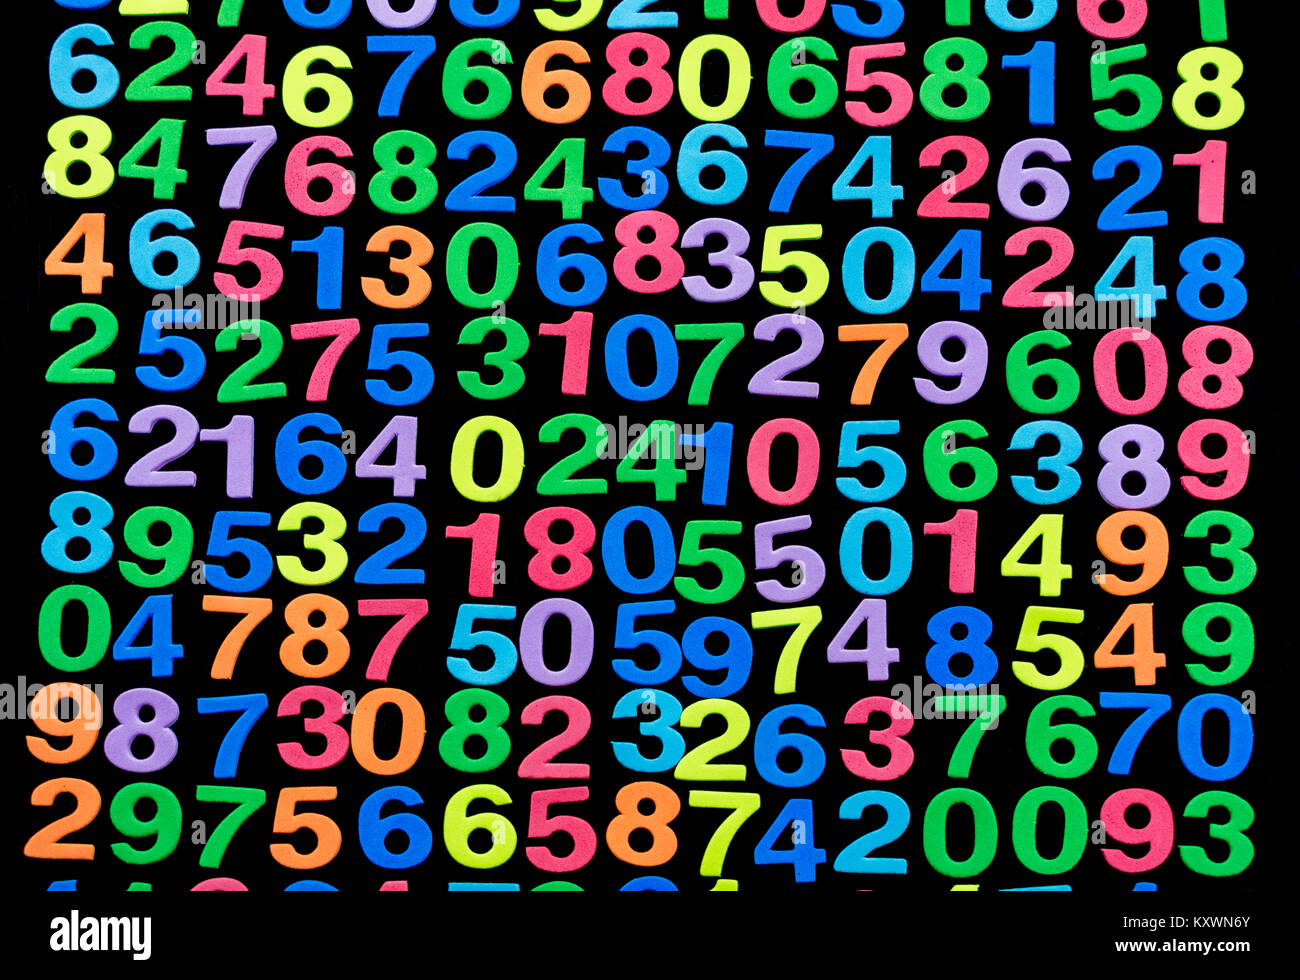 Multiple rows and columns of foam cut colored numbers in random order , against a black background Stock Photo